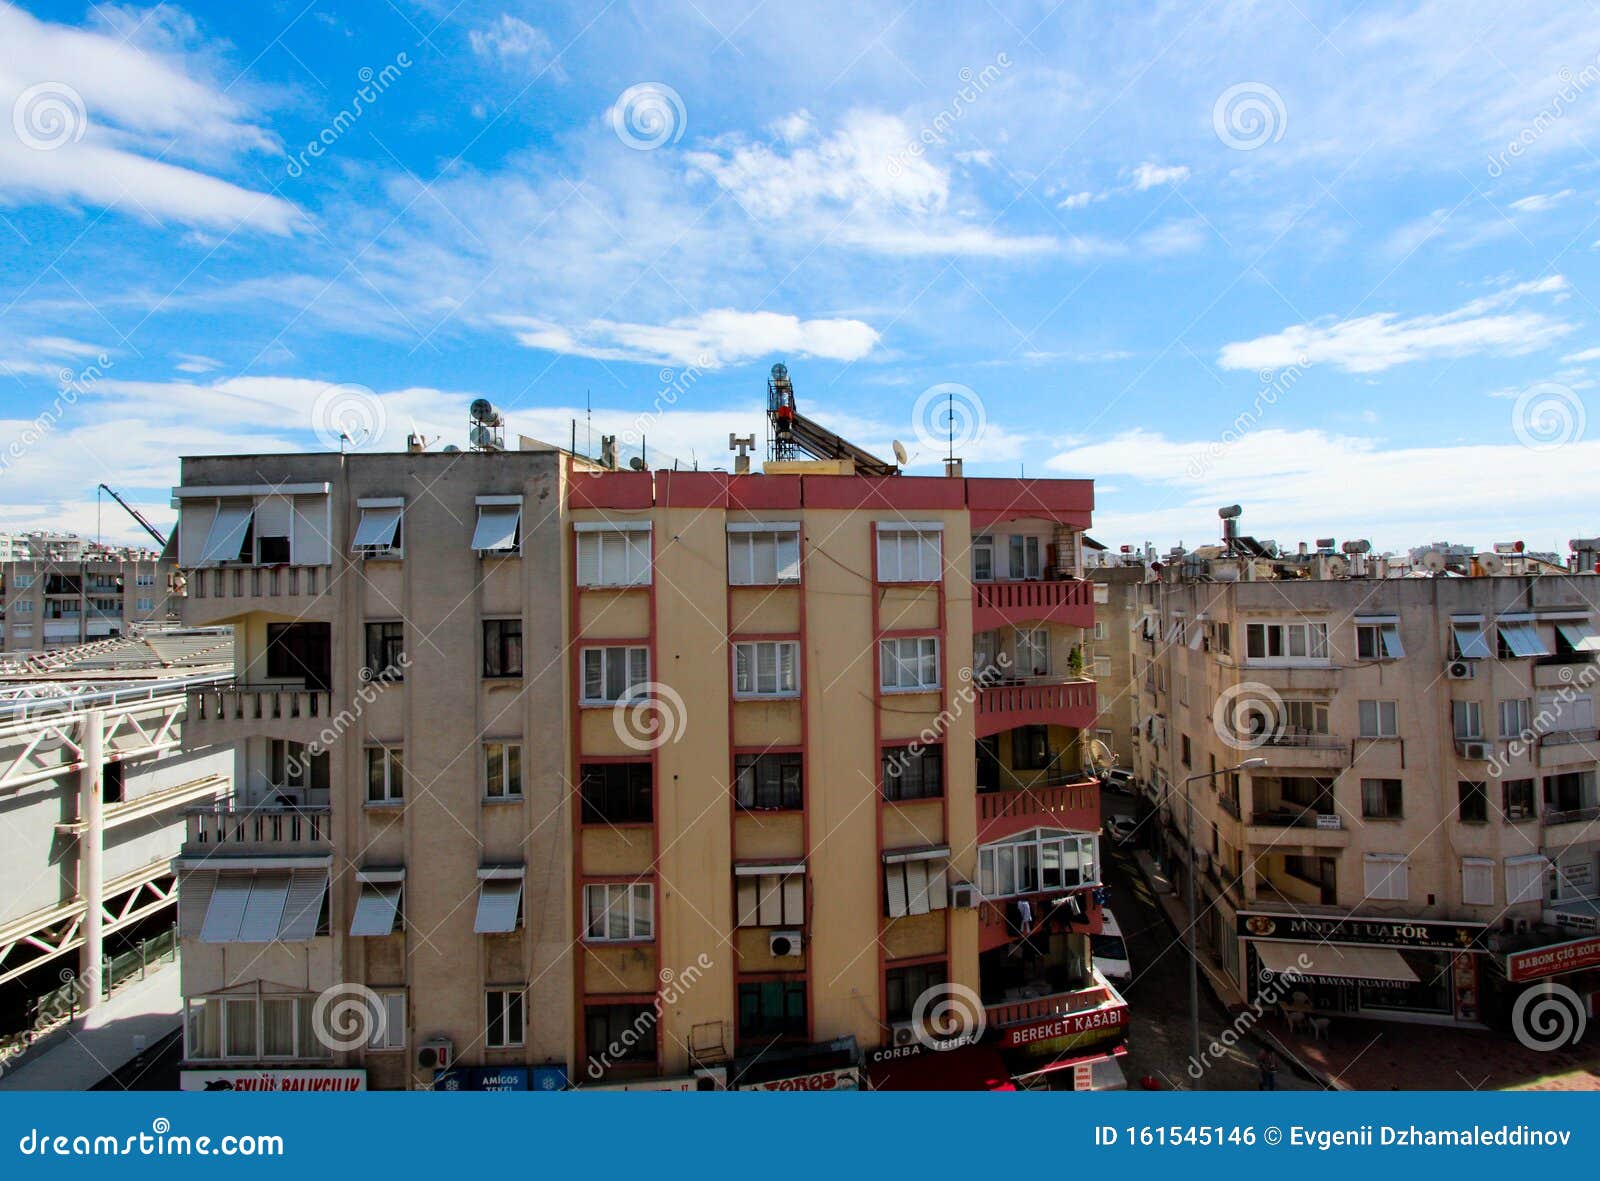 Hare Tilbagetrækning jord View of the City Street. on the Roof There are Solar Panels, Tanks for  Heating Water. Antalya, Turkey, April 6, 2019 Editorial Photo - Image of  life, luxury: 161545146